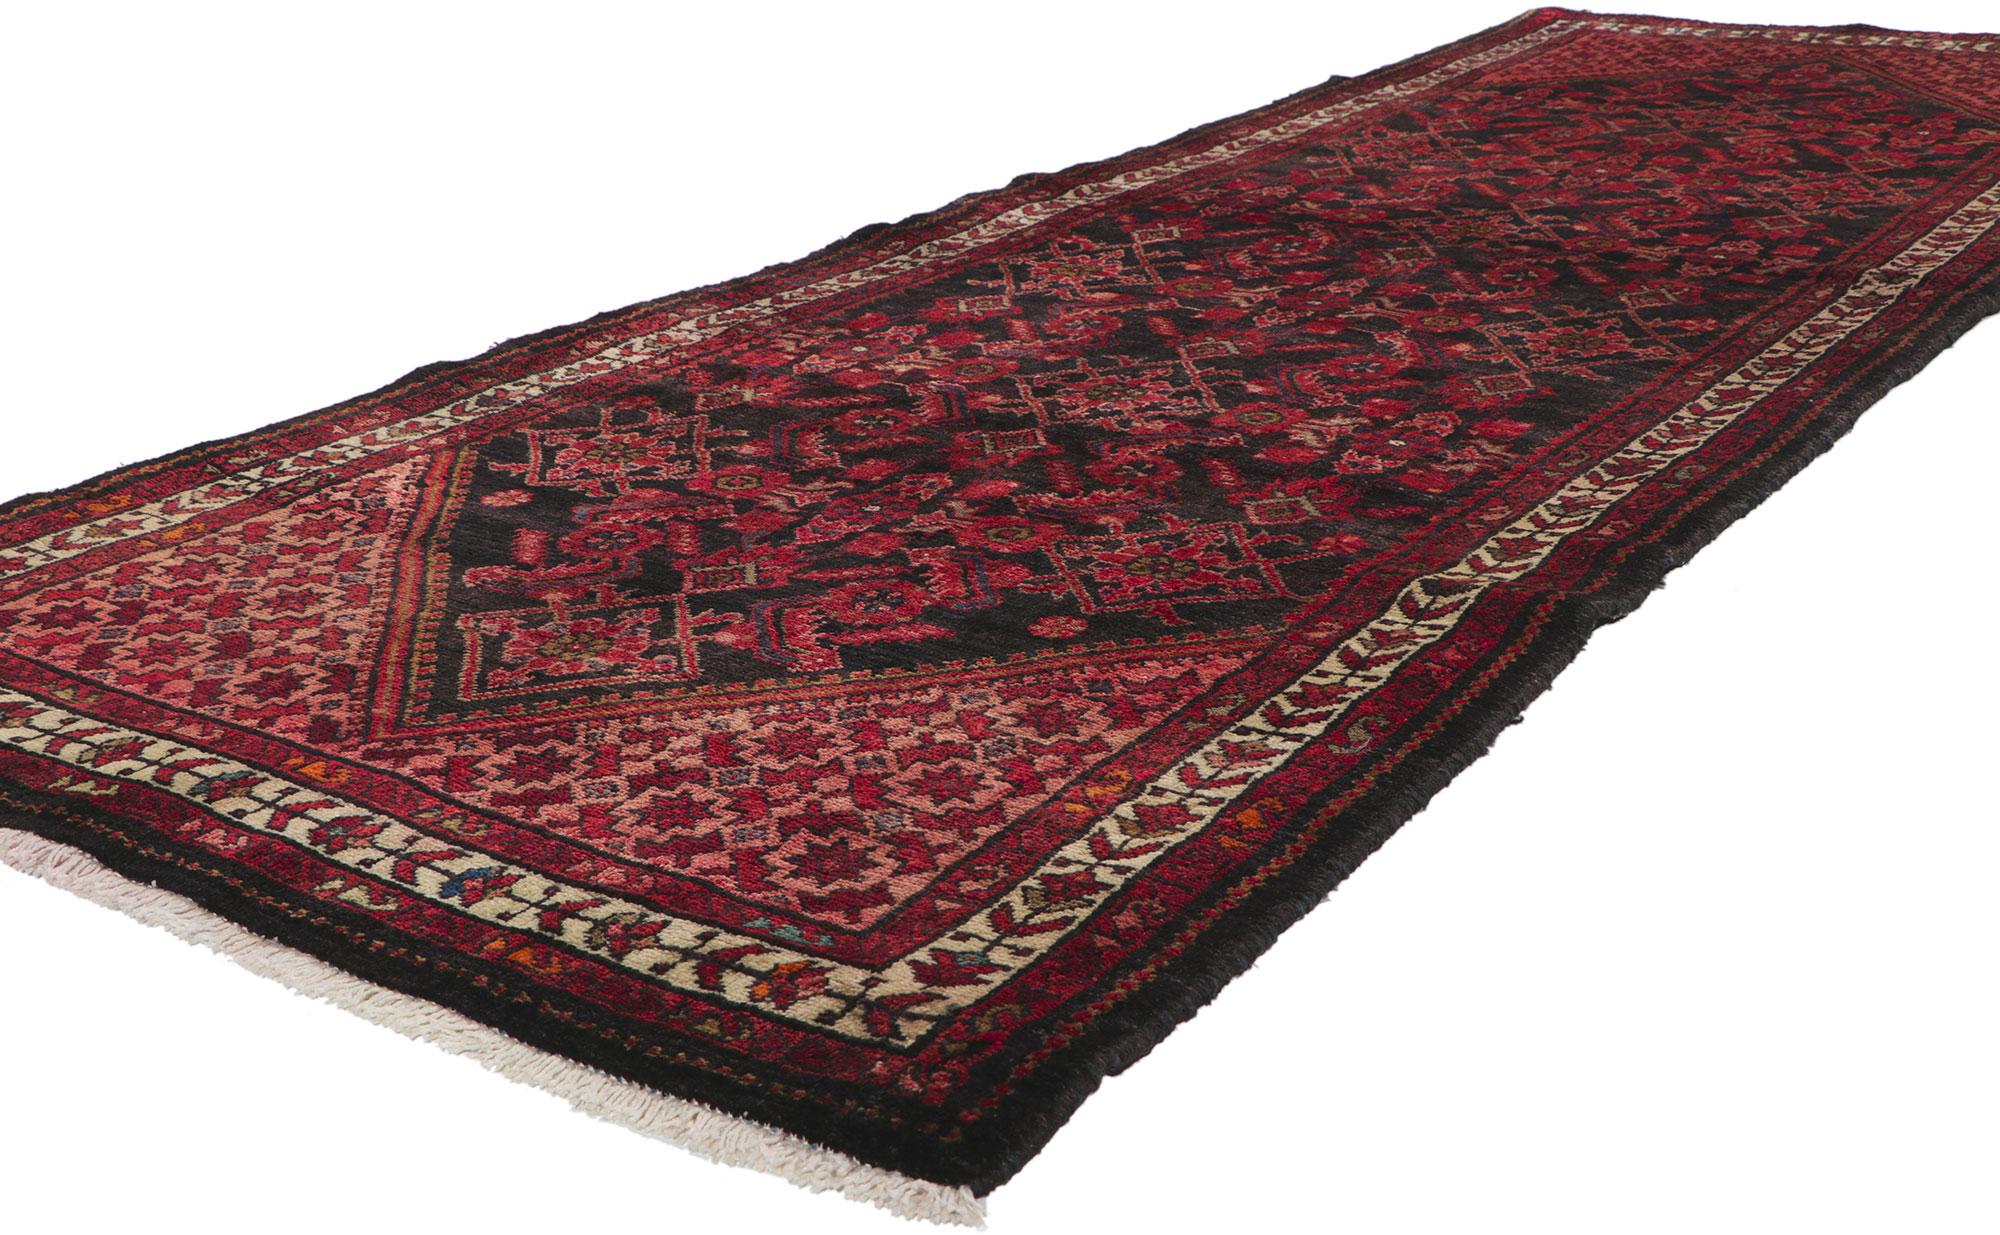 61053 Vintage Persian Malayer Rug Runner, 03'05 x 09'10. In the twilight of design, emerges this hand-knotted wool vintage Persian Malayer rug runner, a composition shrouded in mystery and allure. The all-over pattern, a ballet of Herati motifs,